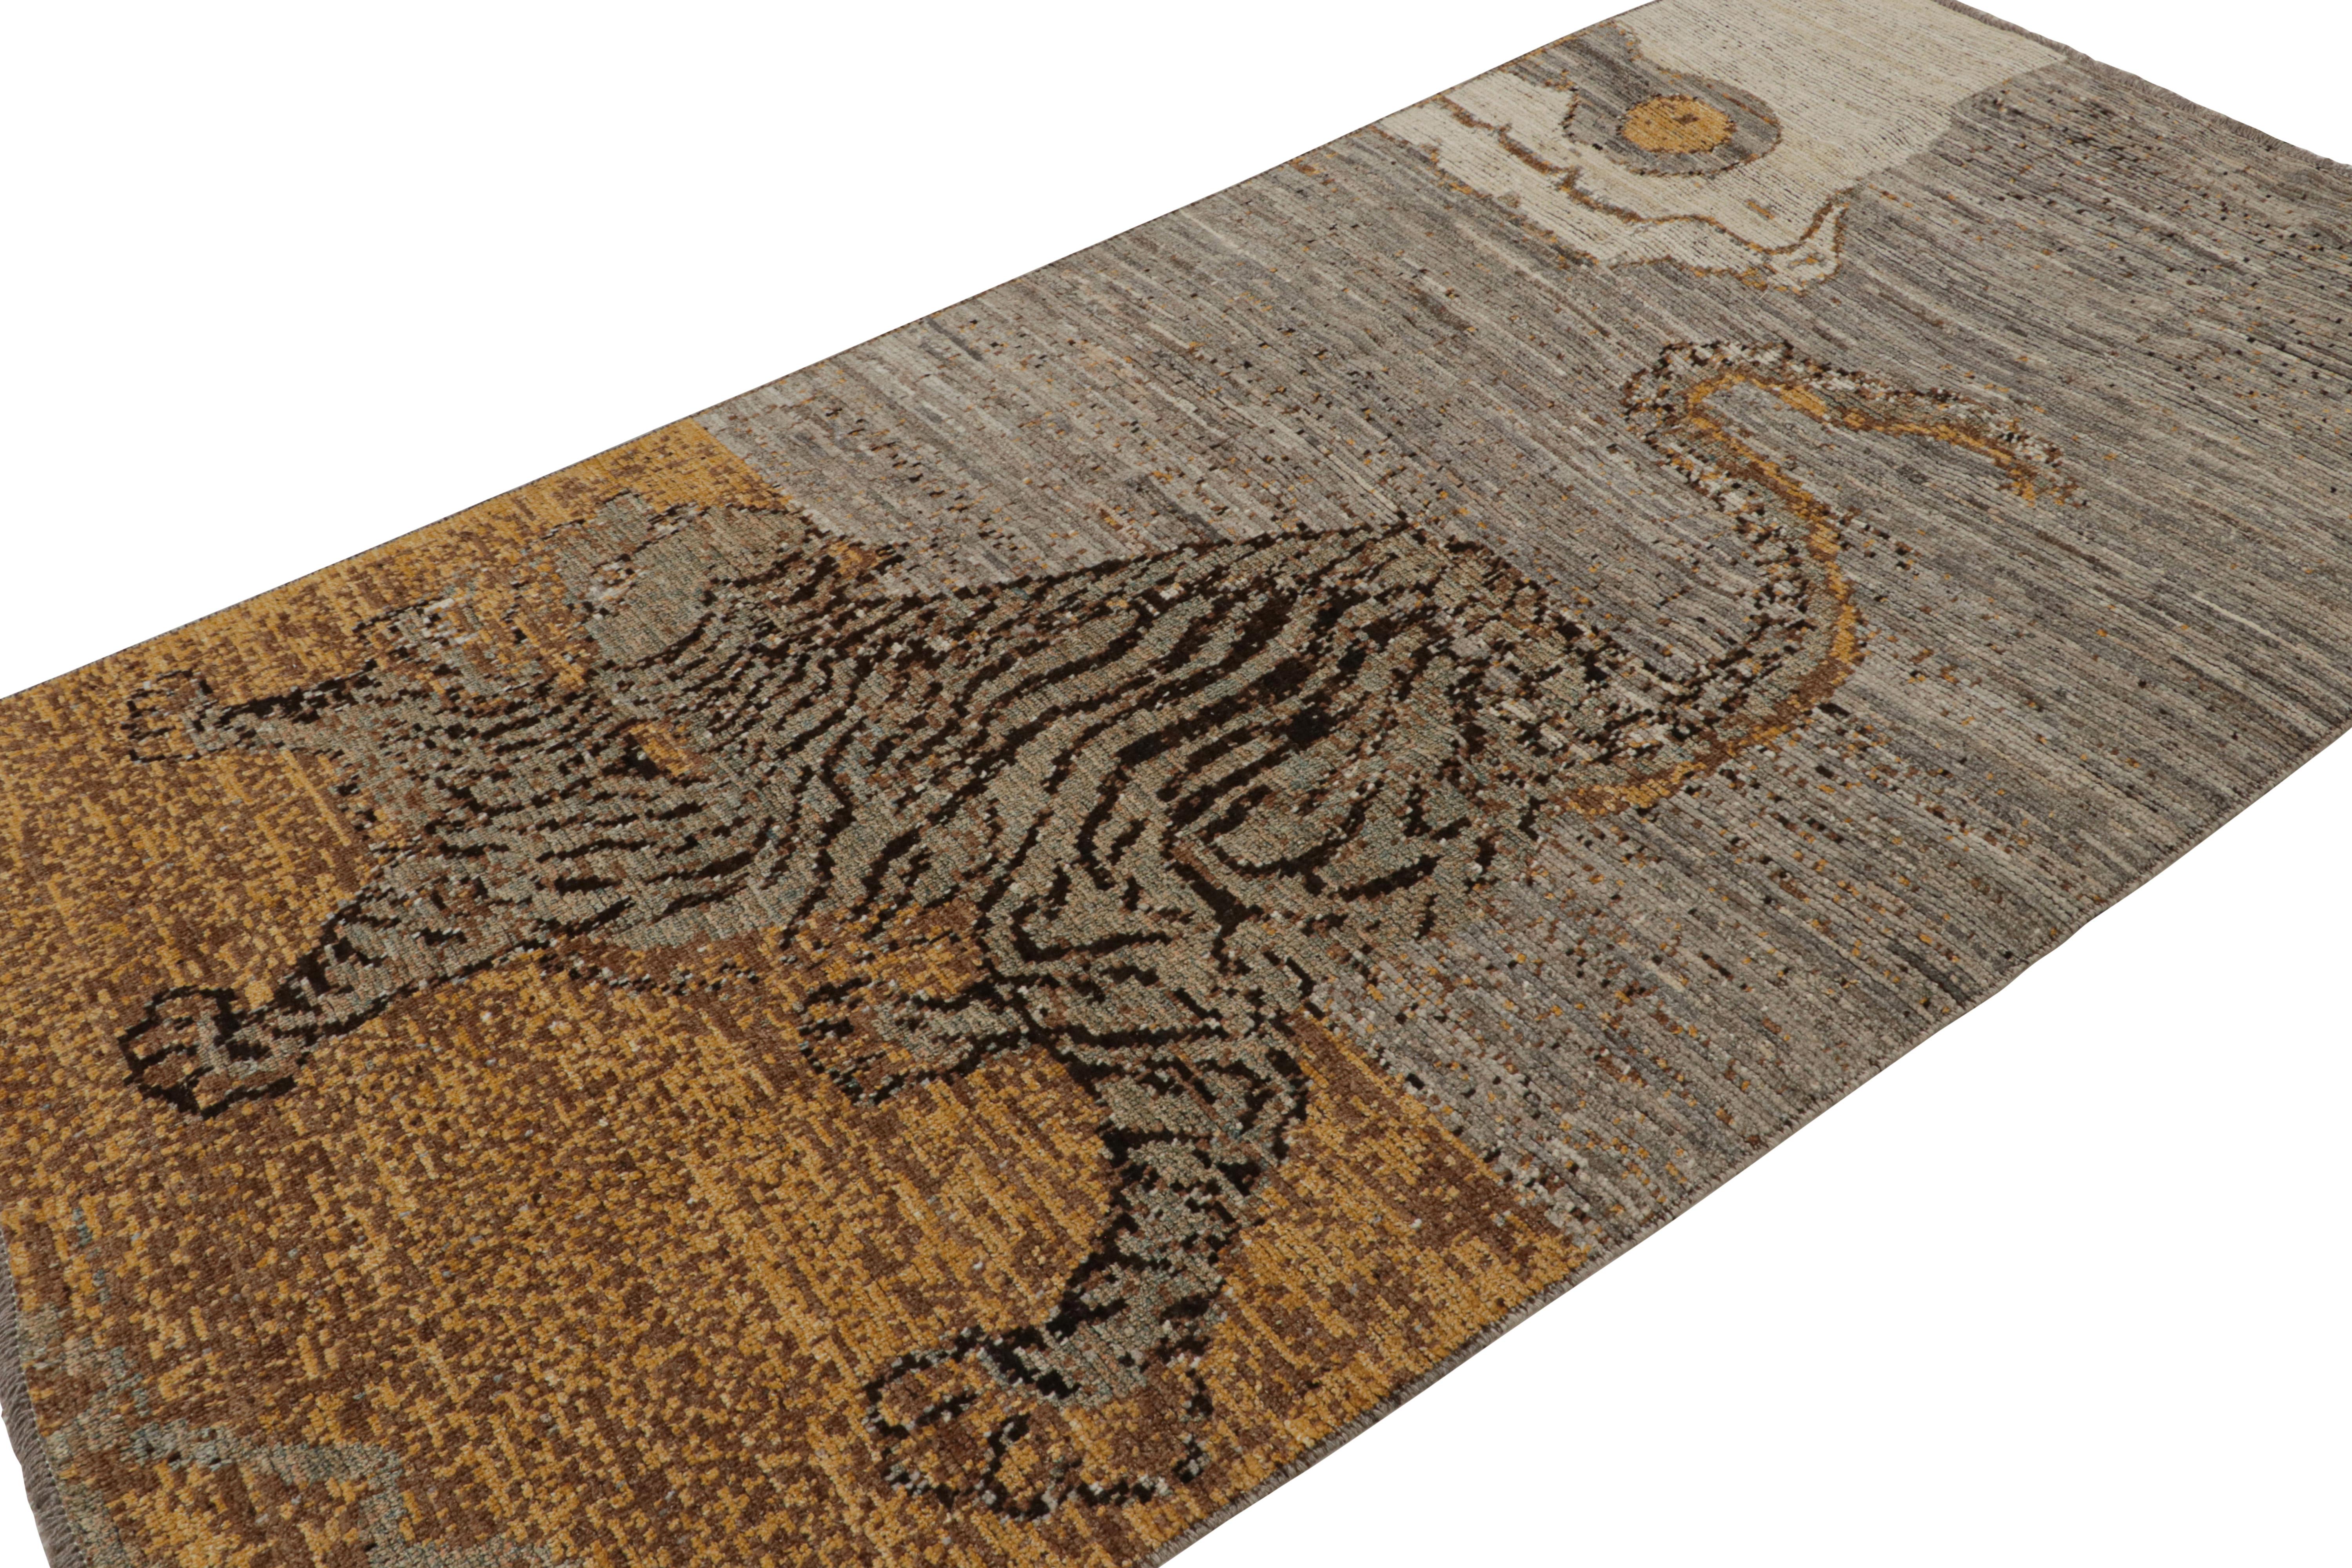 Hand-knotted in wool, this 5x10 modern rug from our Tiger rug line in Modern Classics collection, has been particularly inspired by a Mongolian take on the style.

On the Design:

History meets art in this elegant piece with animal pictorials which